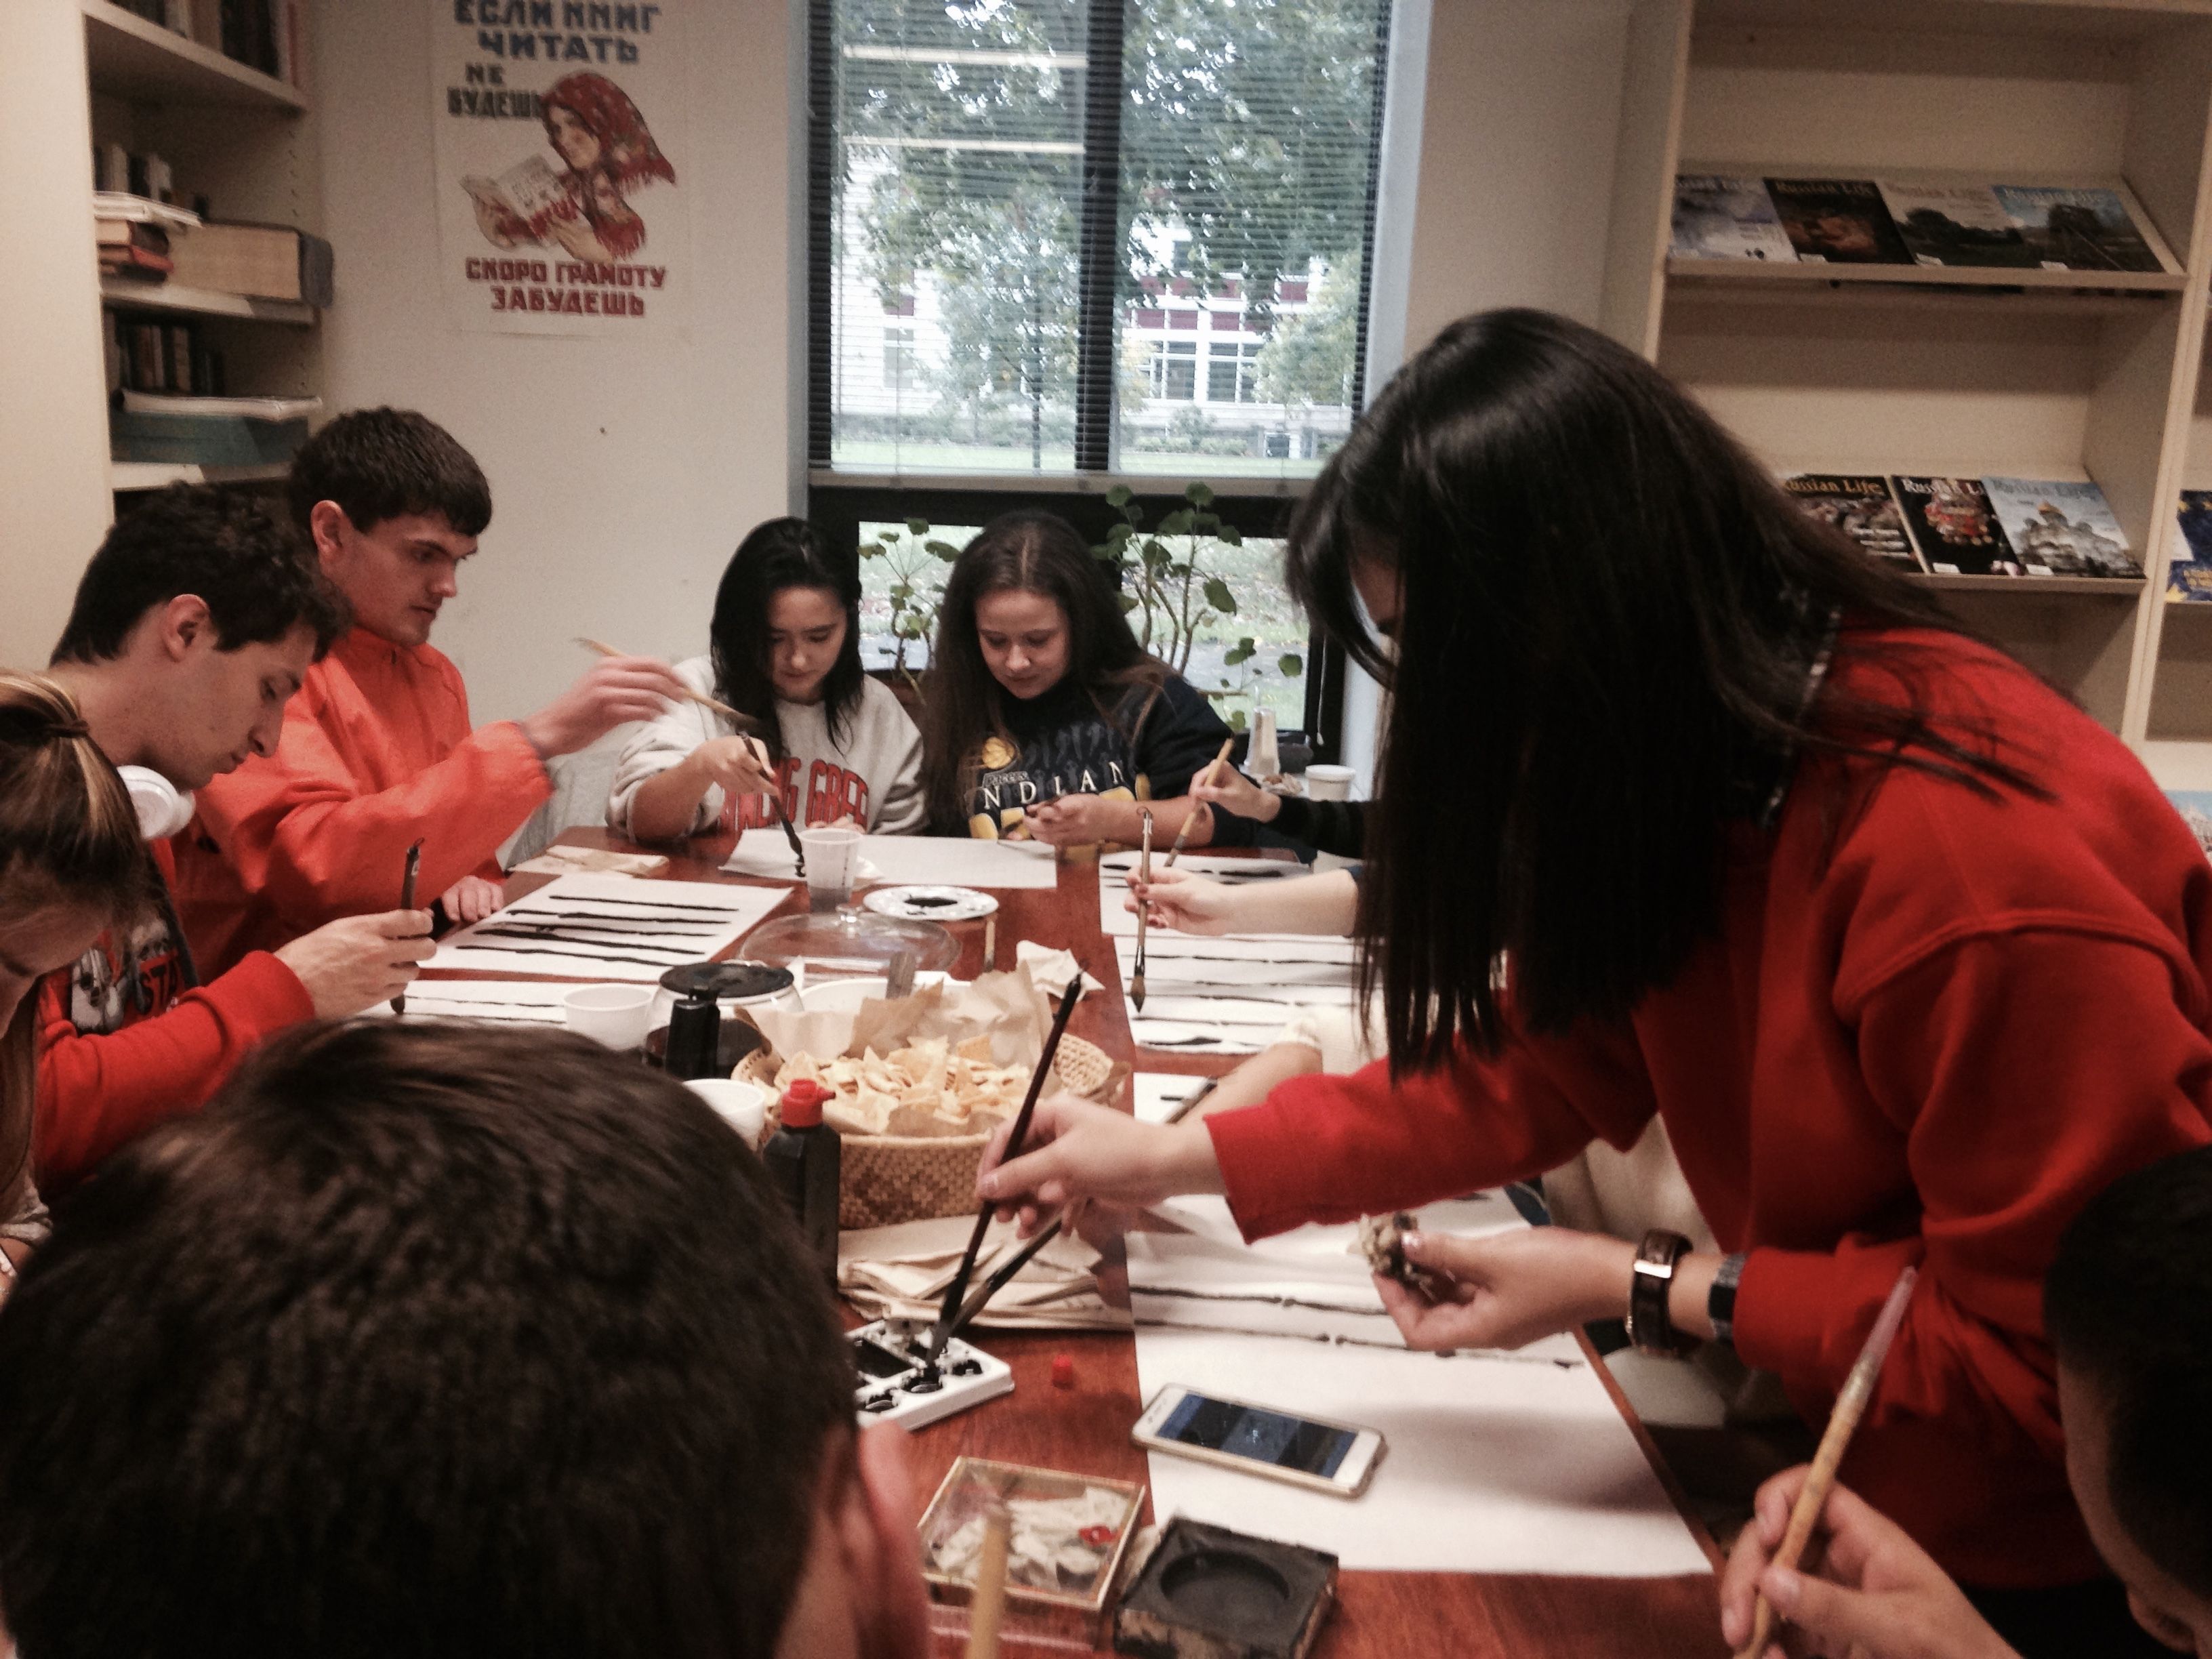 BGSU students can experience Chinese culture, calligraphy and learn valuable language skills with a minor in Chinese.